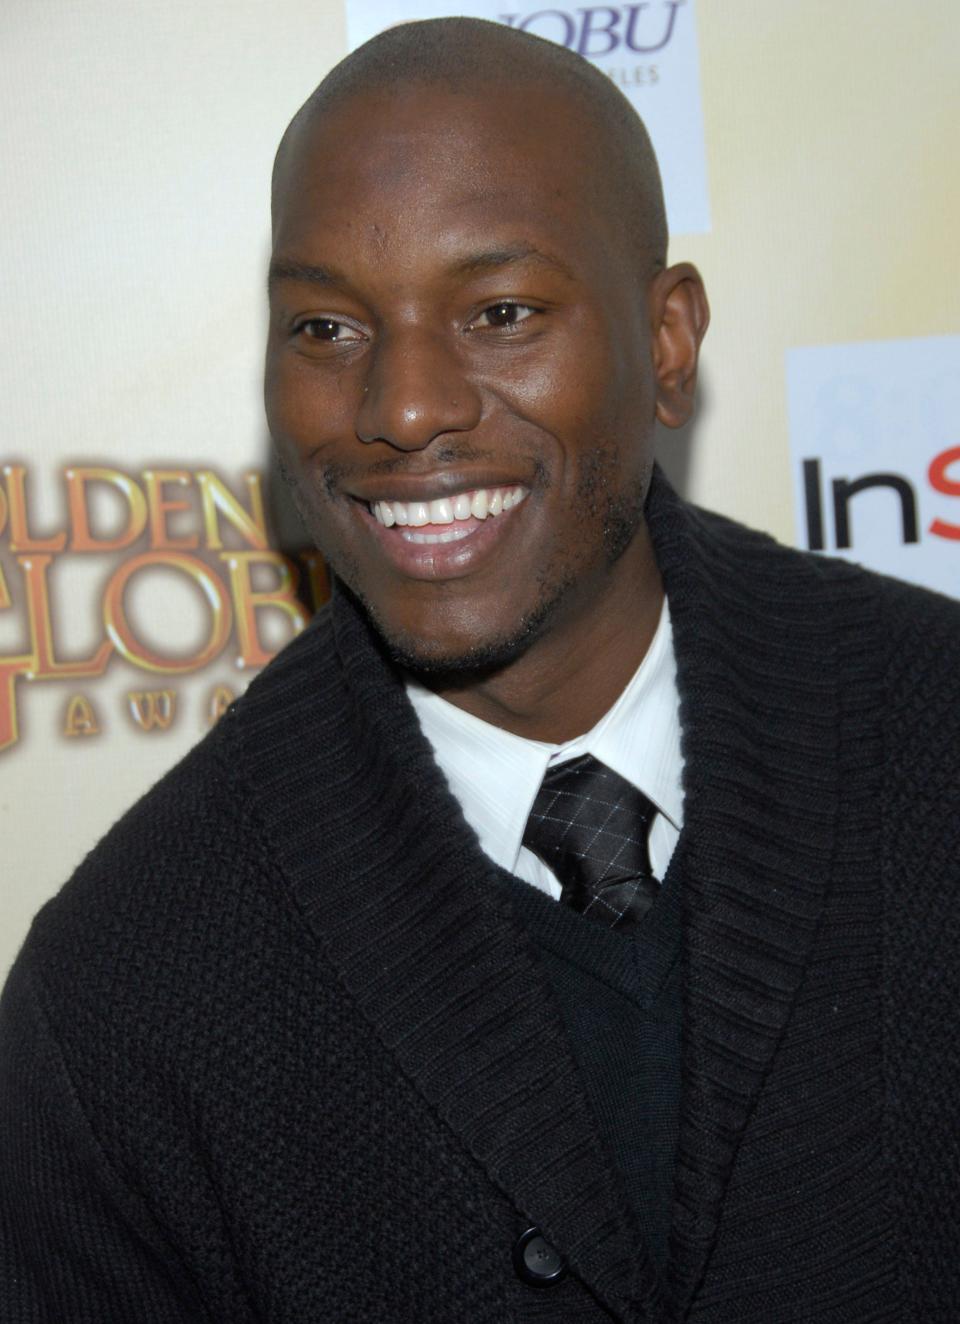 Actor and singer Tyrese Gibson